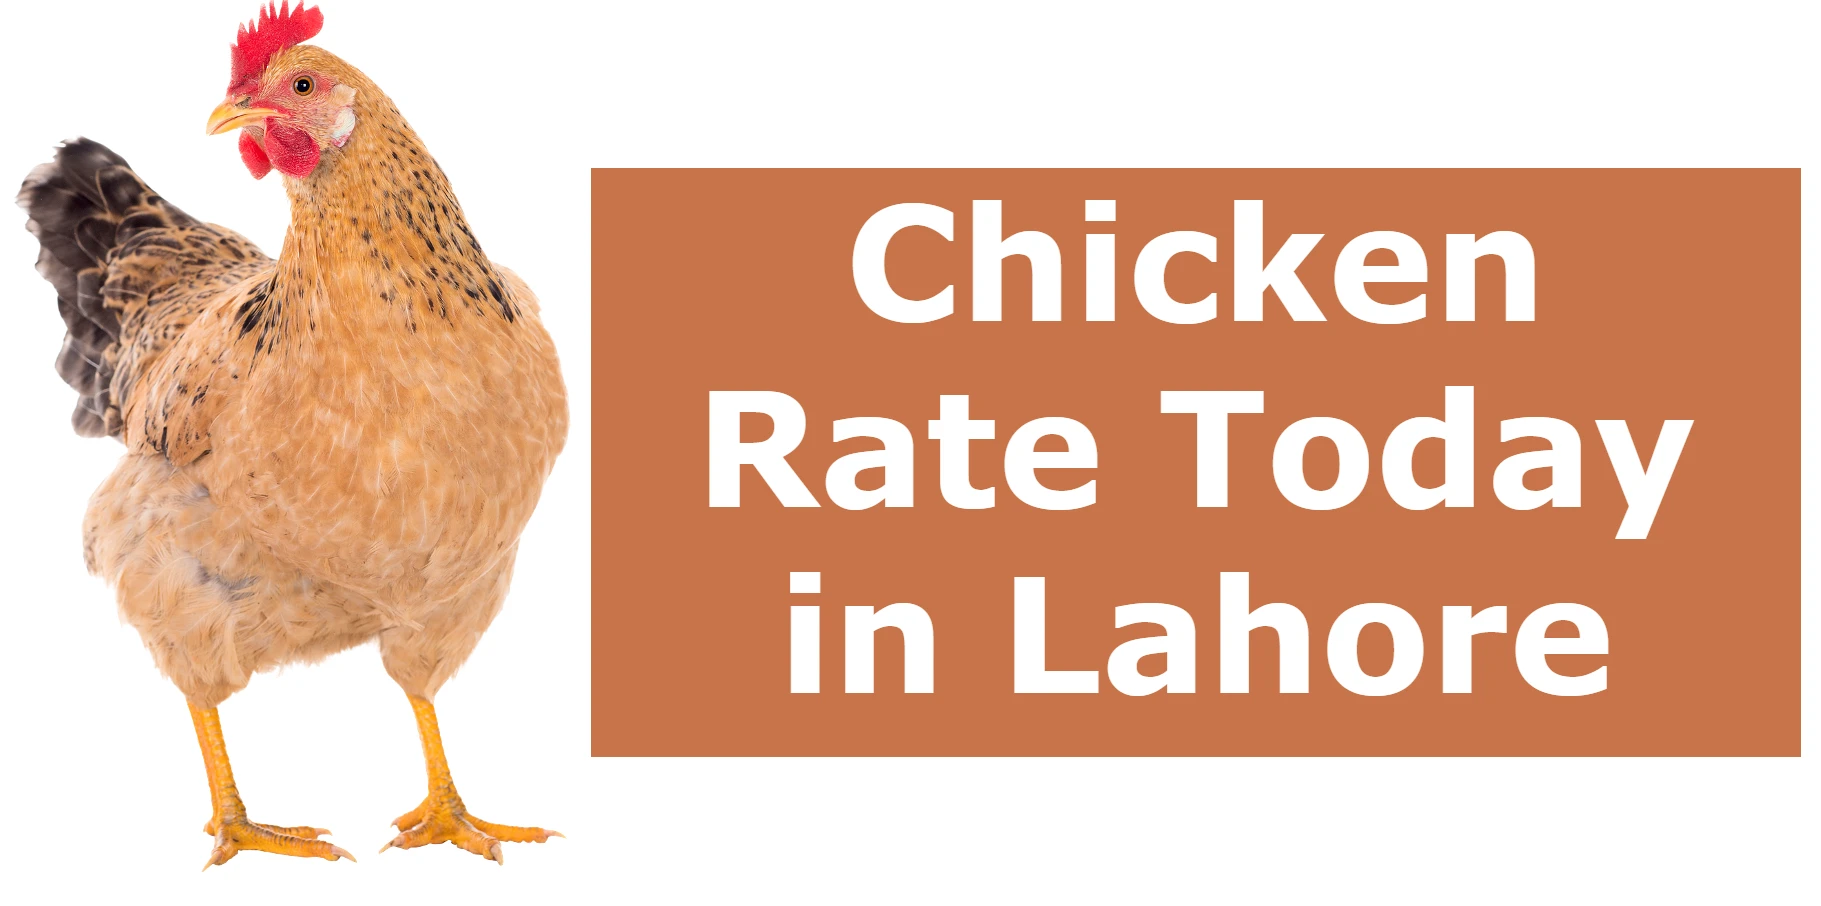 Chicken Rate Today In Lahore